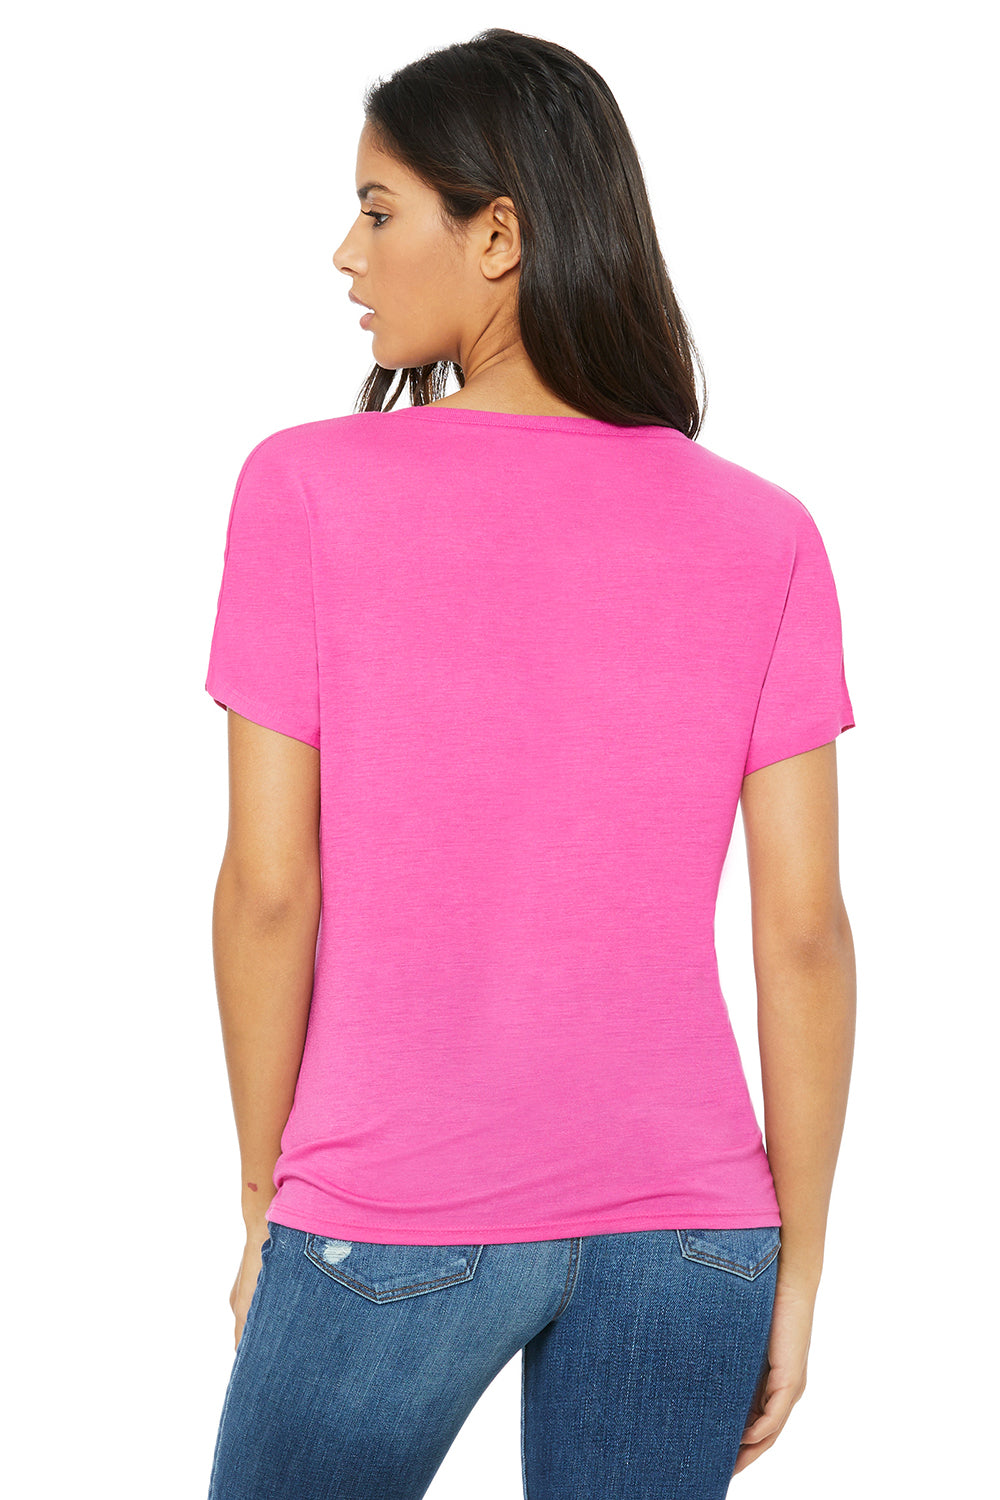 Bella + Canvas 8815 Womens Slouchy Short Sleeve V-Neck T-Shirt Berry Pink Back